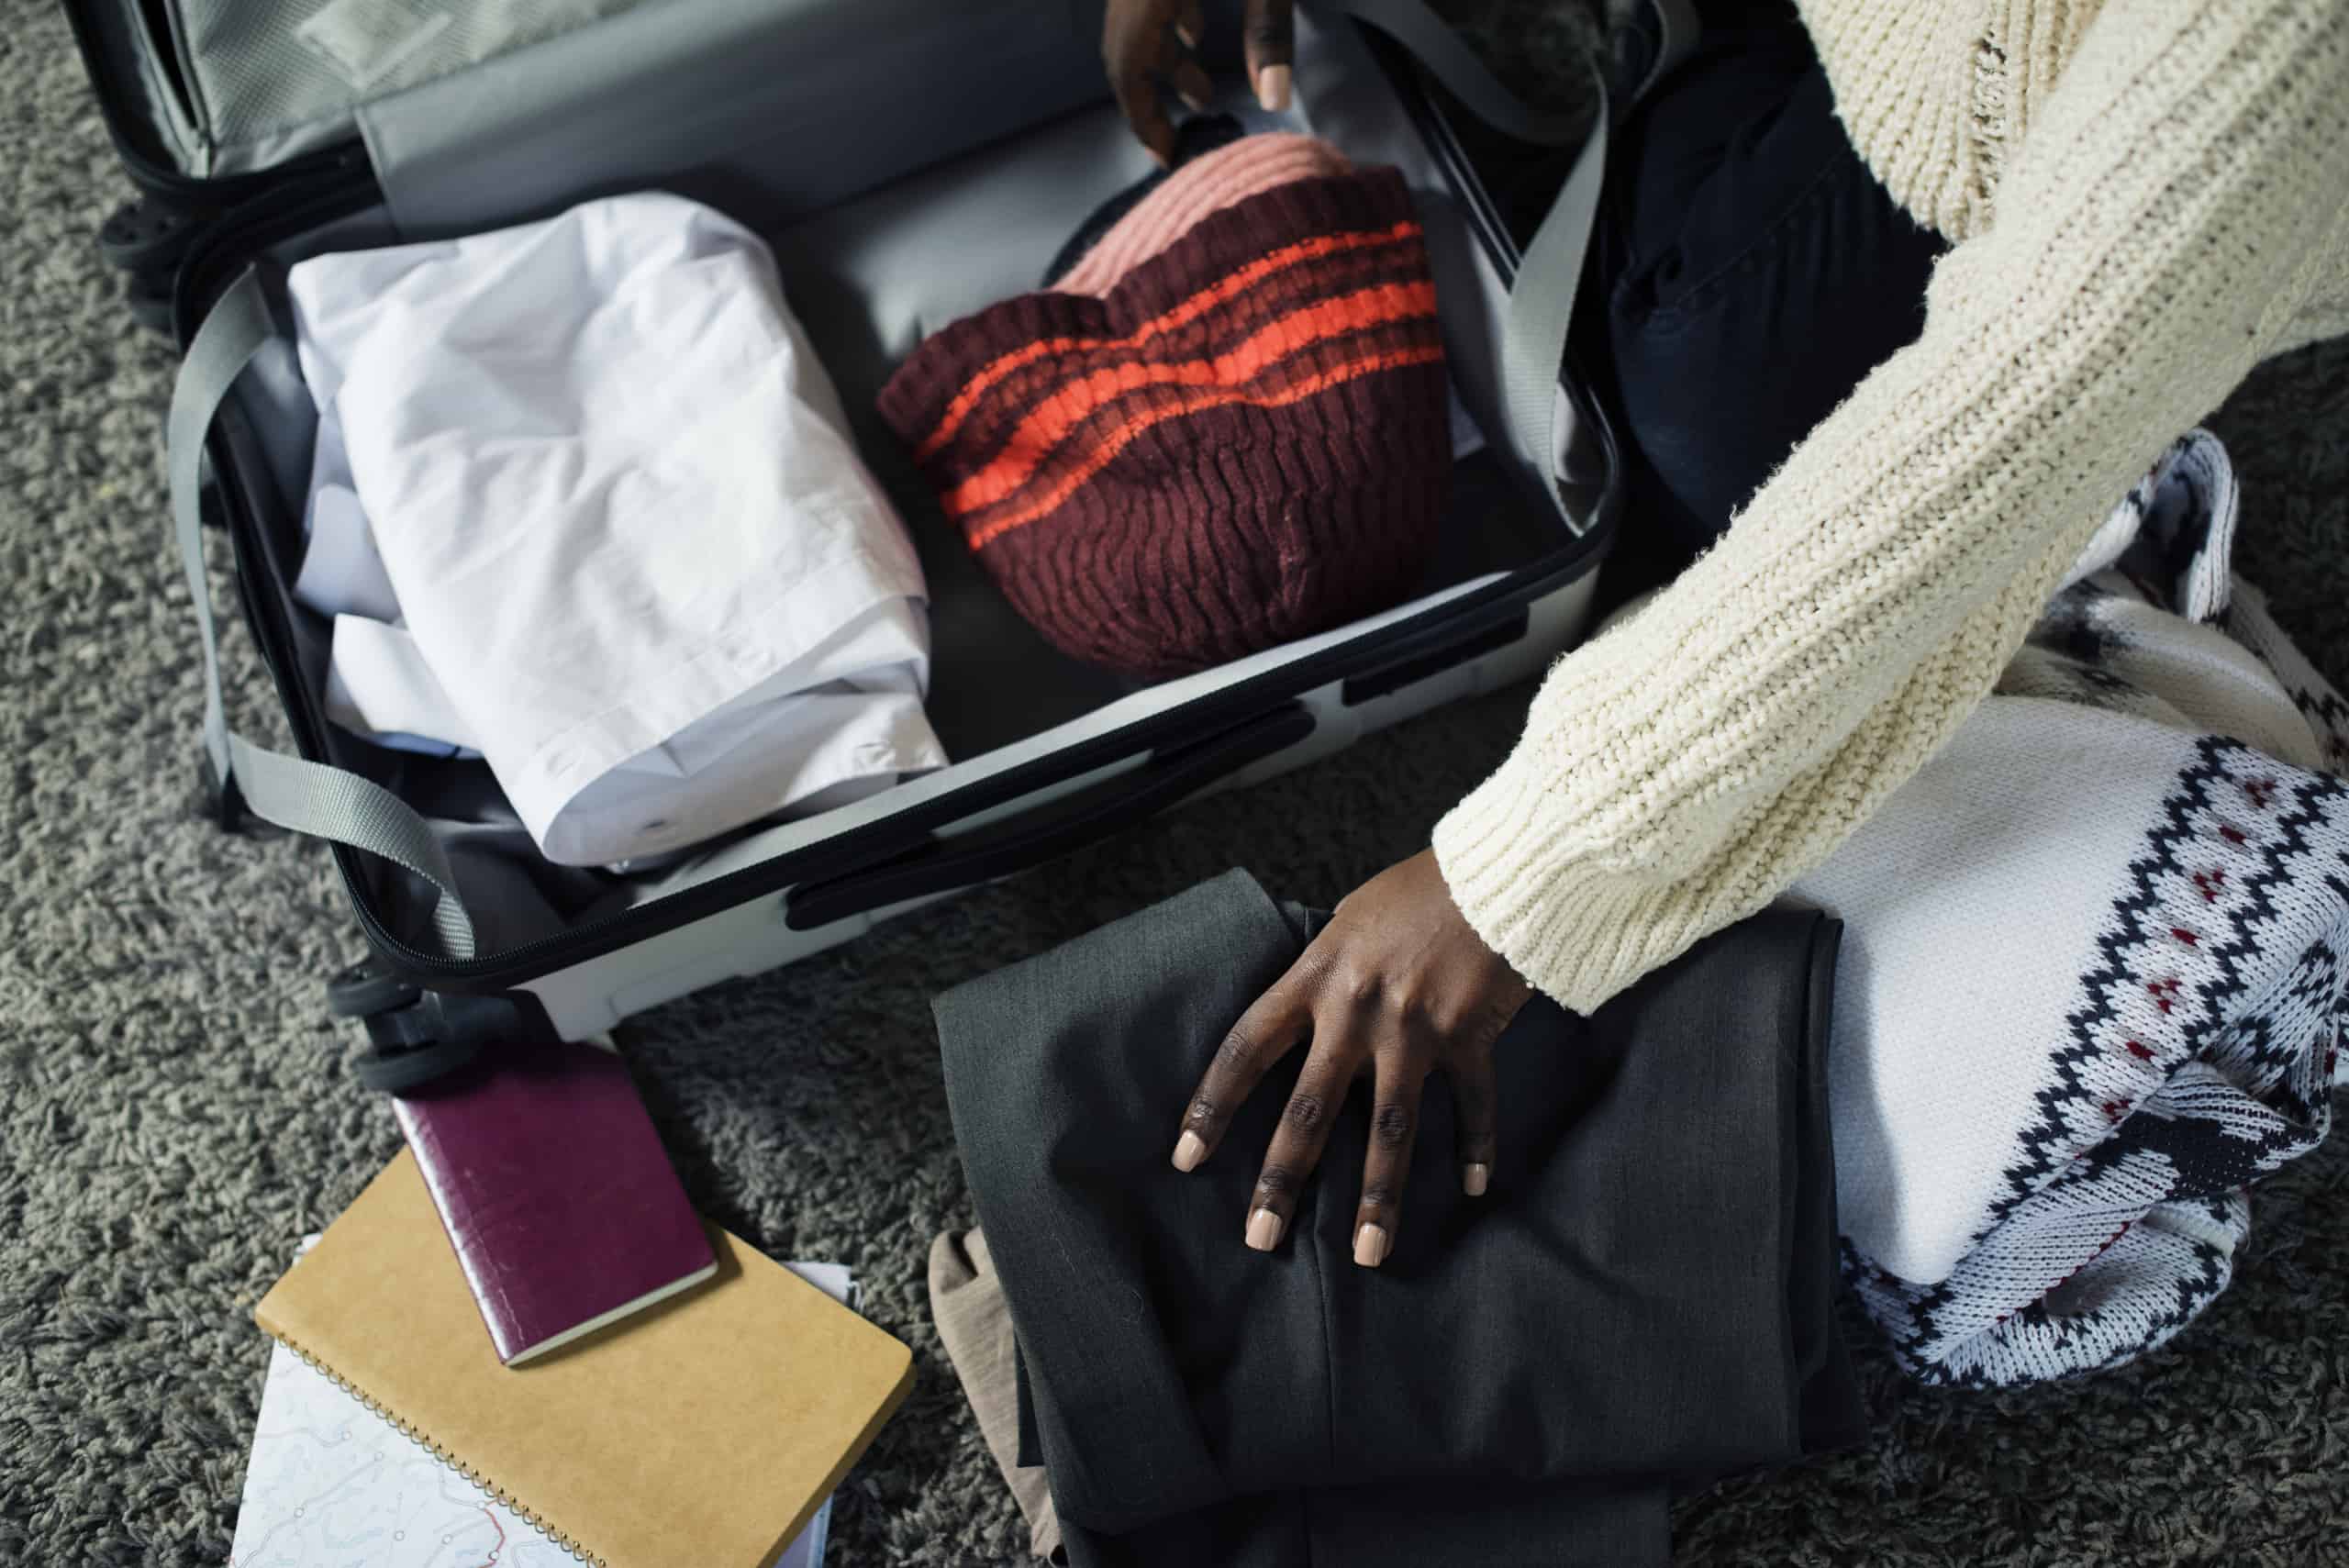 10 Travel Hacks to Save Time and Money on Your Next Trip